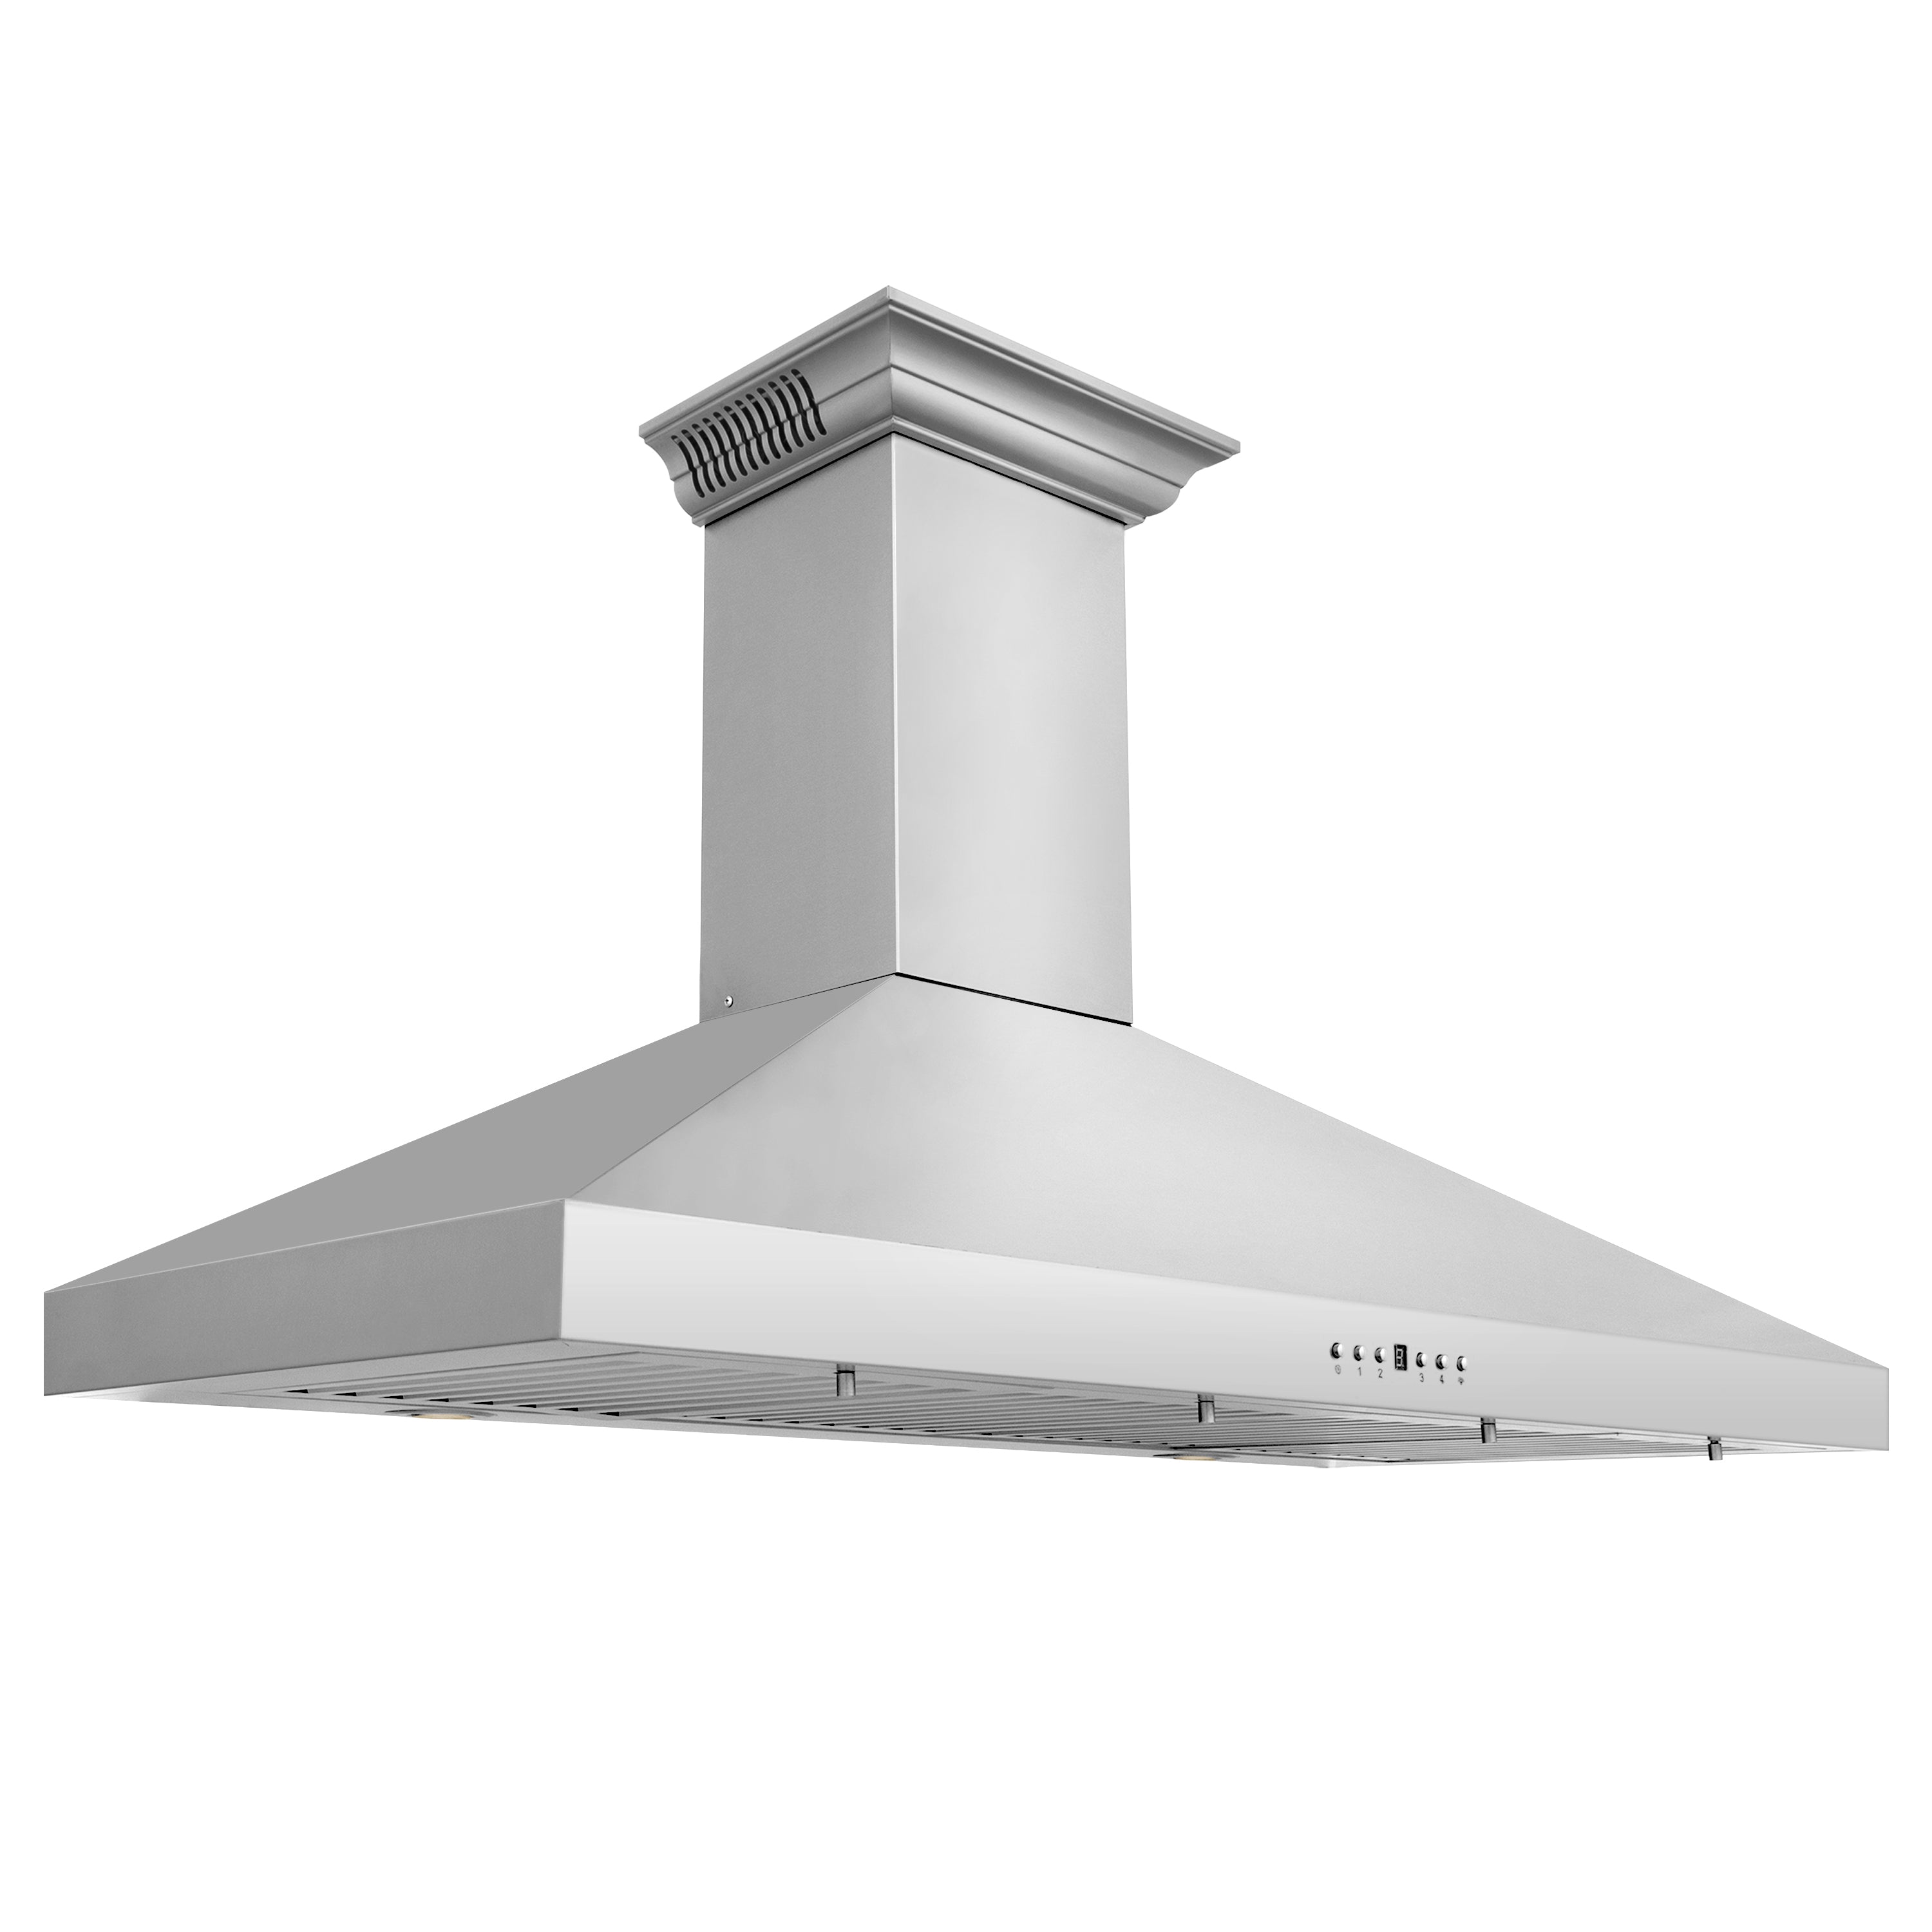 48" ZLINE CrownSound‚ Ducted Vent Wall Mount Range Hood in Stainless Steel with Built-in Bluetooth Speakers (KL3CRN-BT-48)